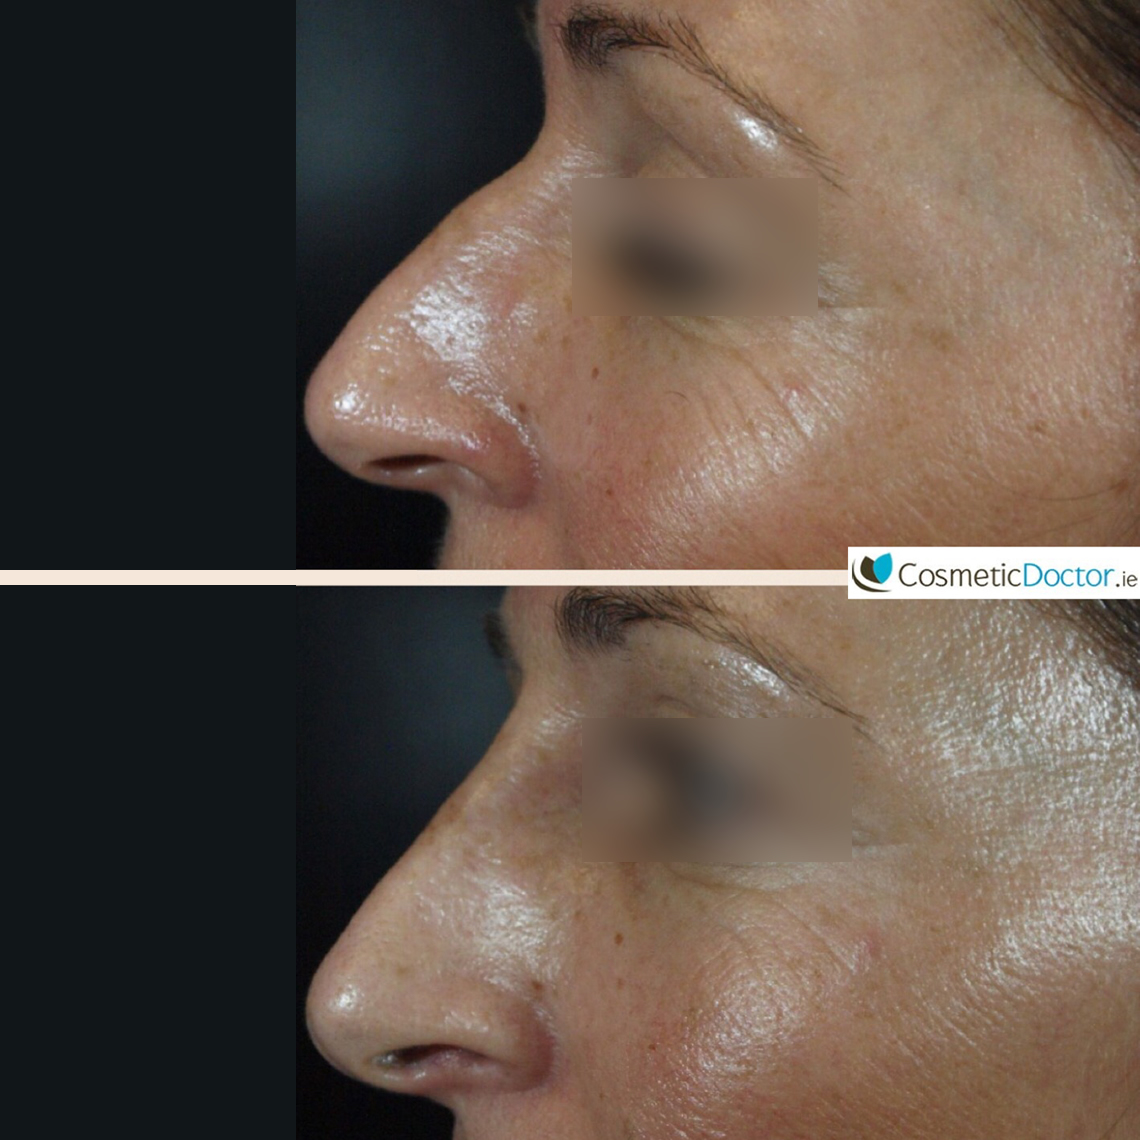 Before and after non-surgical rhinoplasty